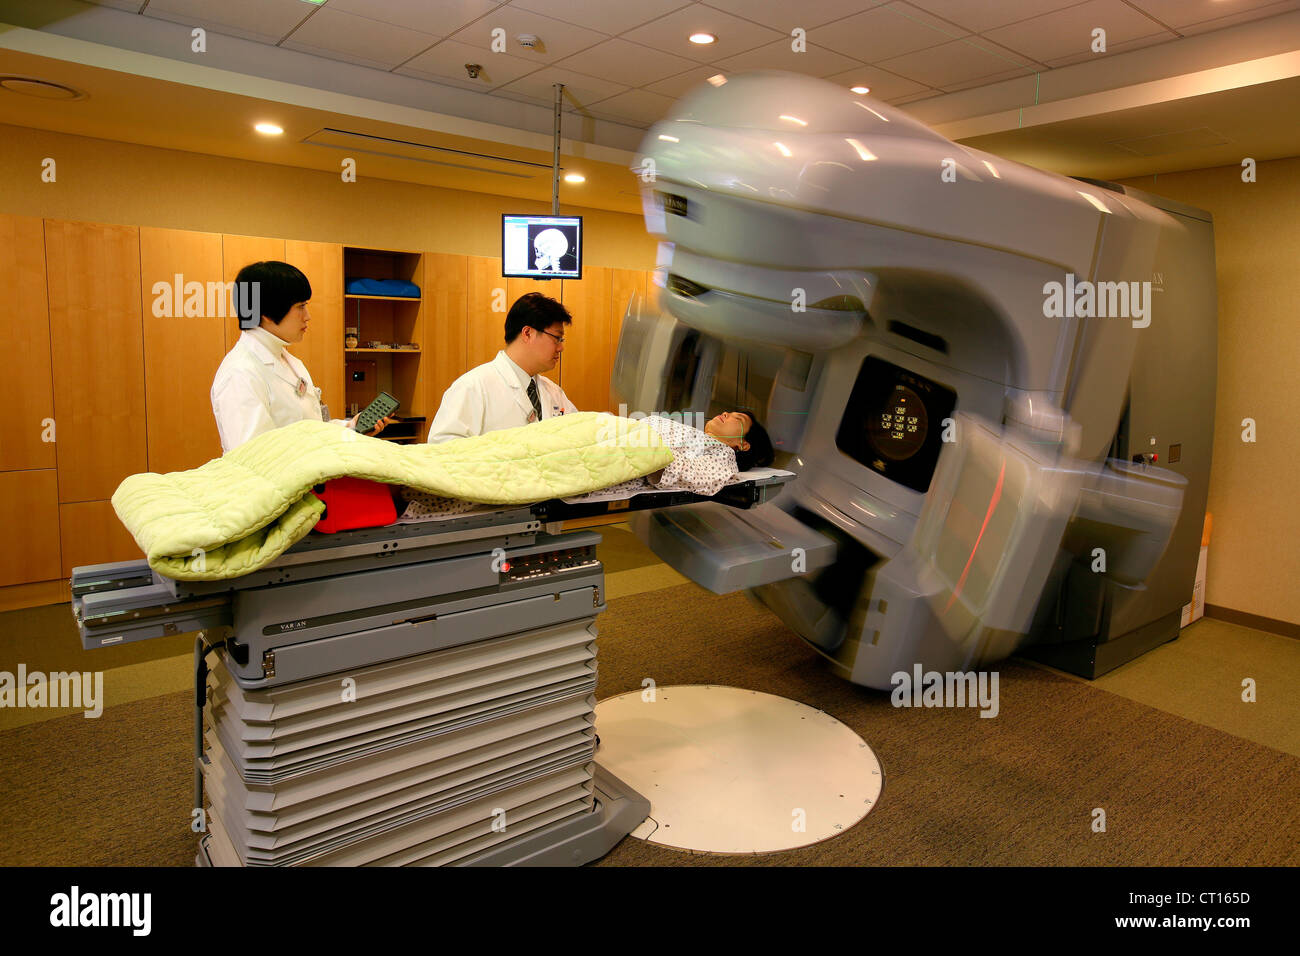 A patient undergoes a CT scan under care of staff at the Samsung Medical Center. Stock Photo